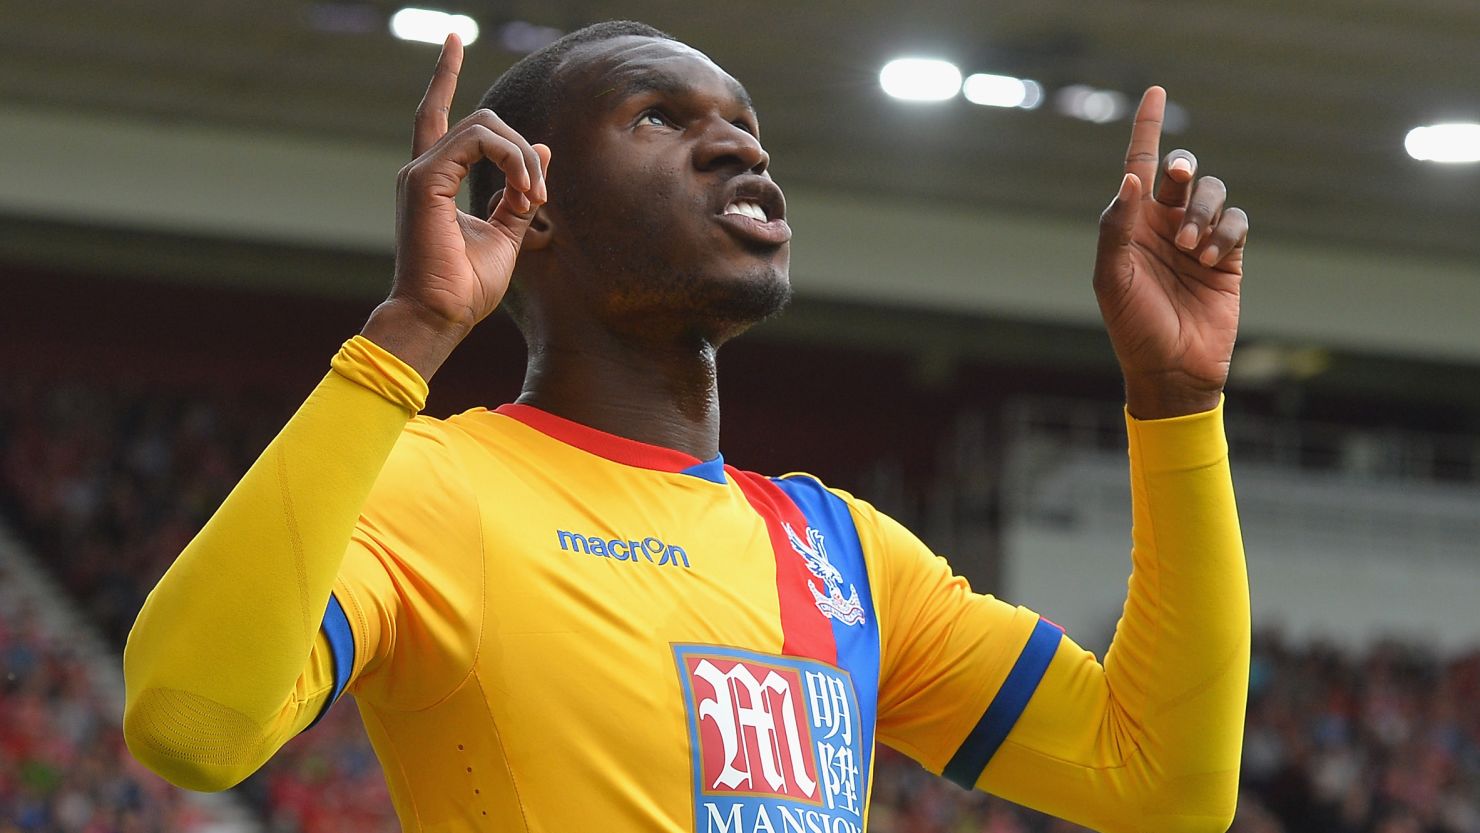 Christian Benteke has returned to form since joining Crystal Palace in August 2016.